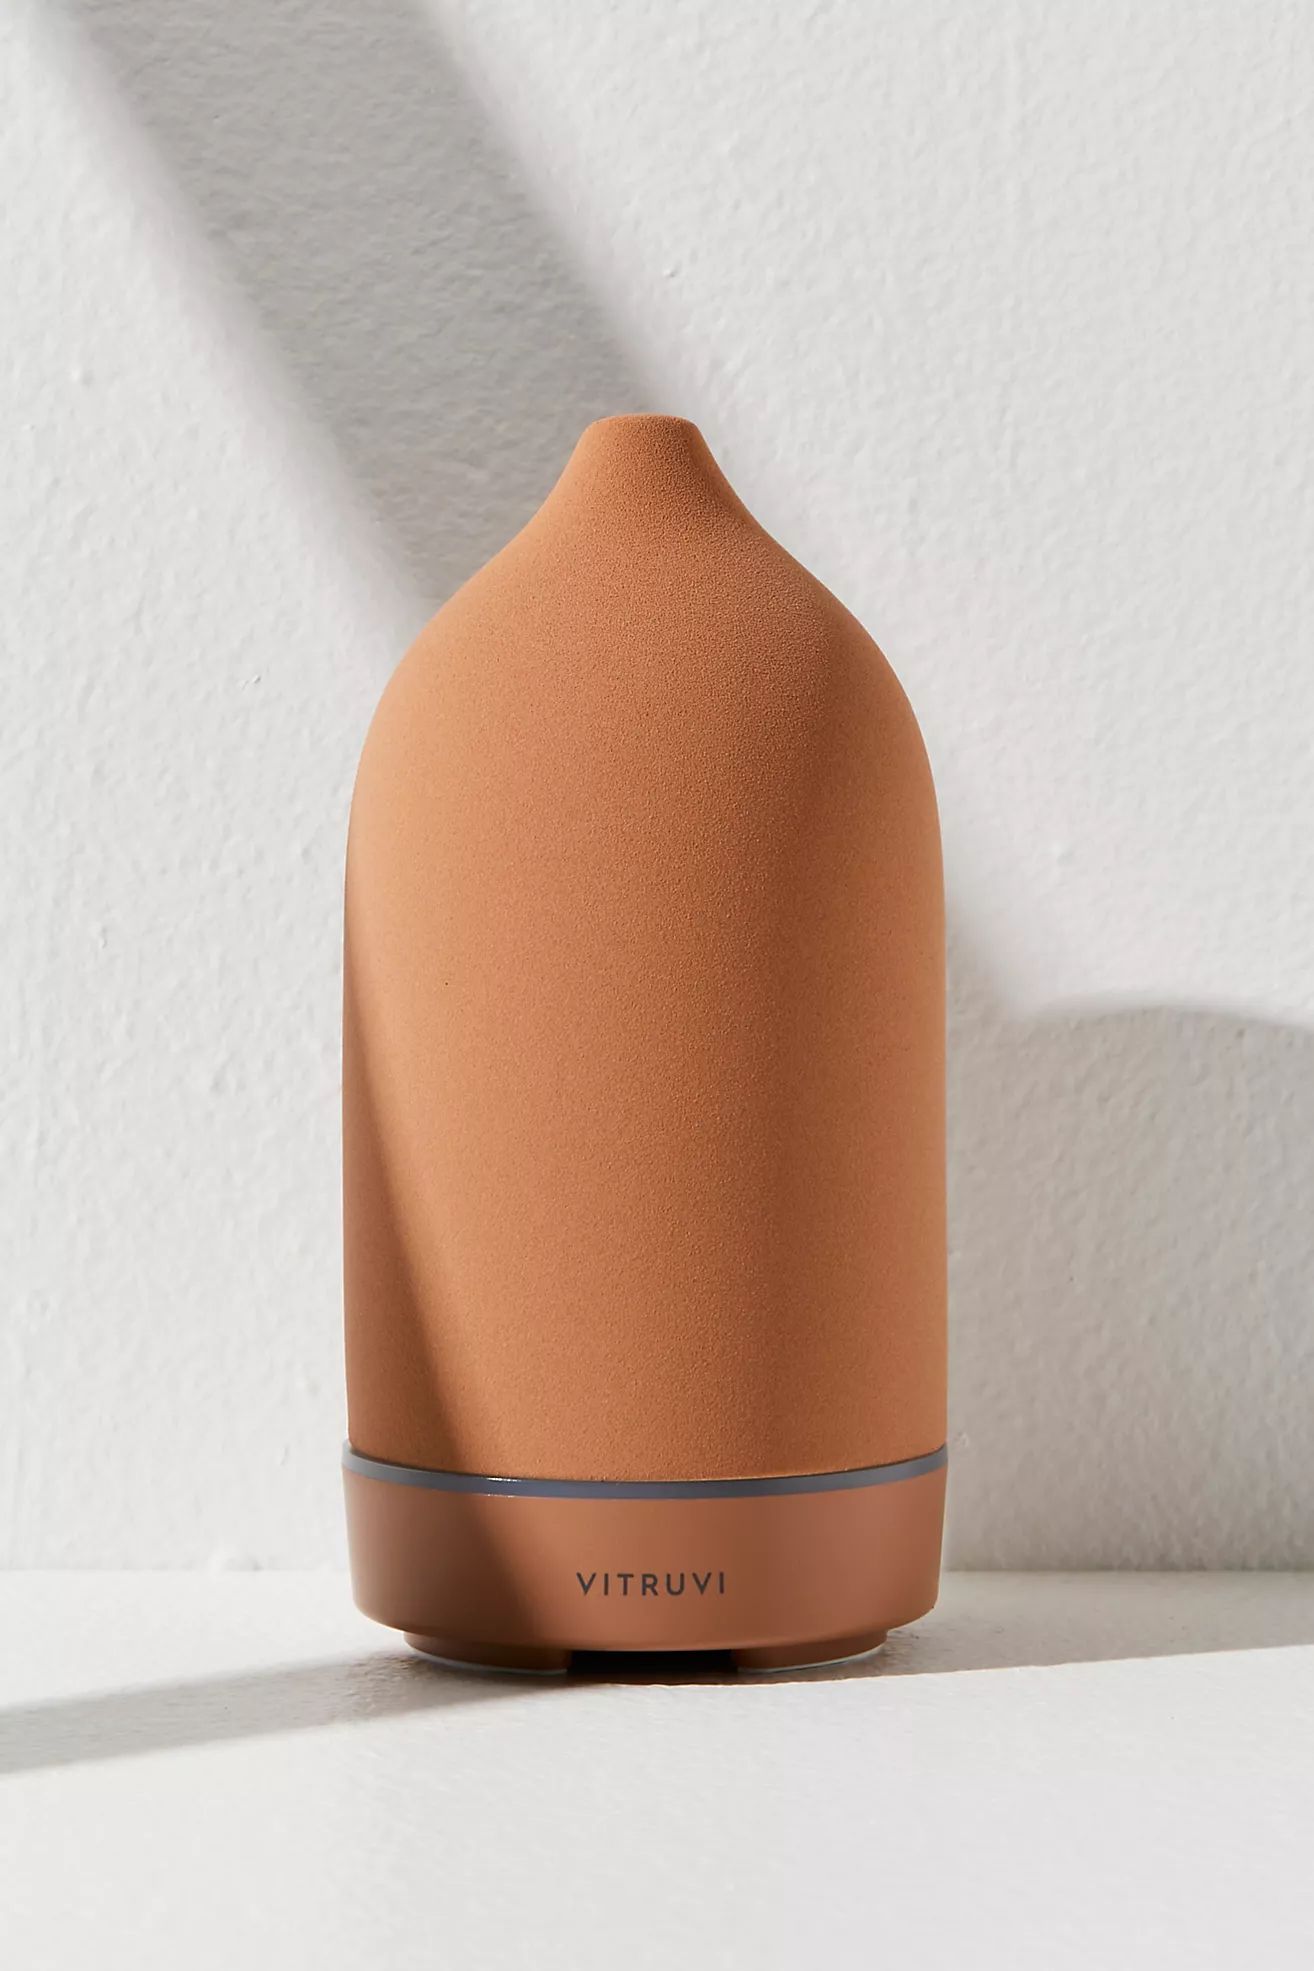 Vitruvi Stone Essential Oil Diffuser | Free People (Global - UK&FR Excluded)